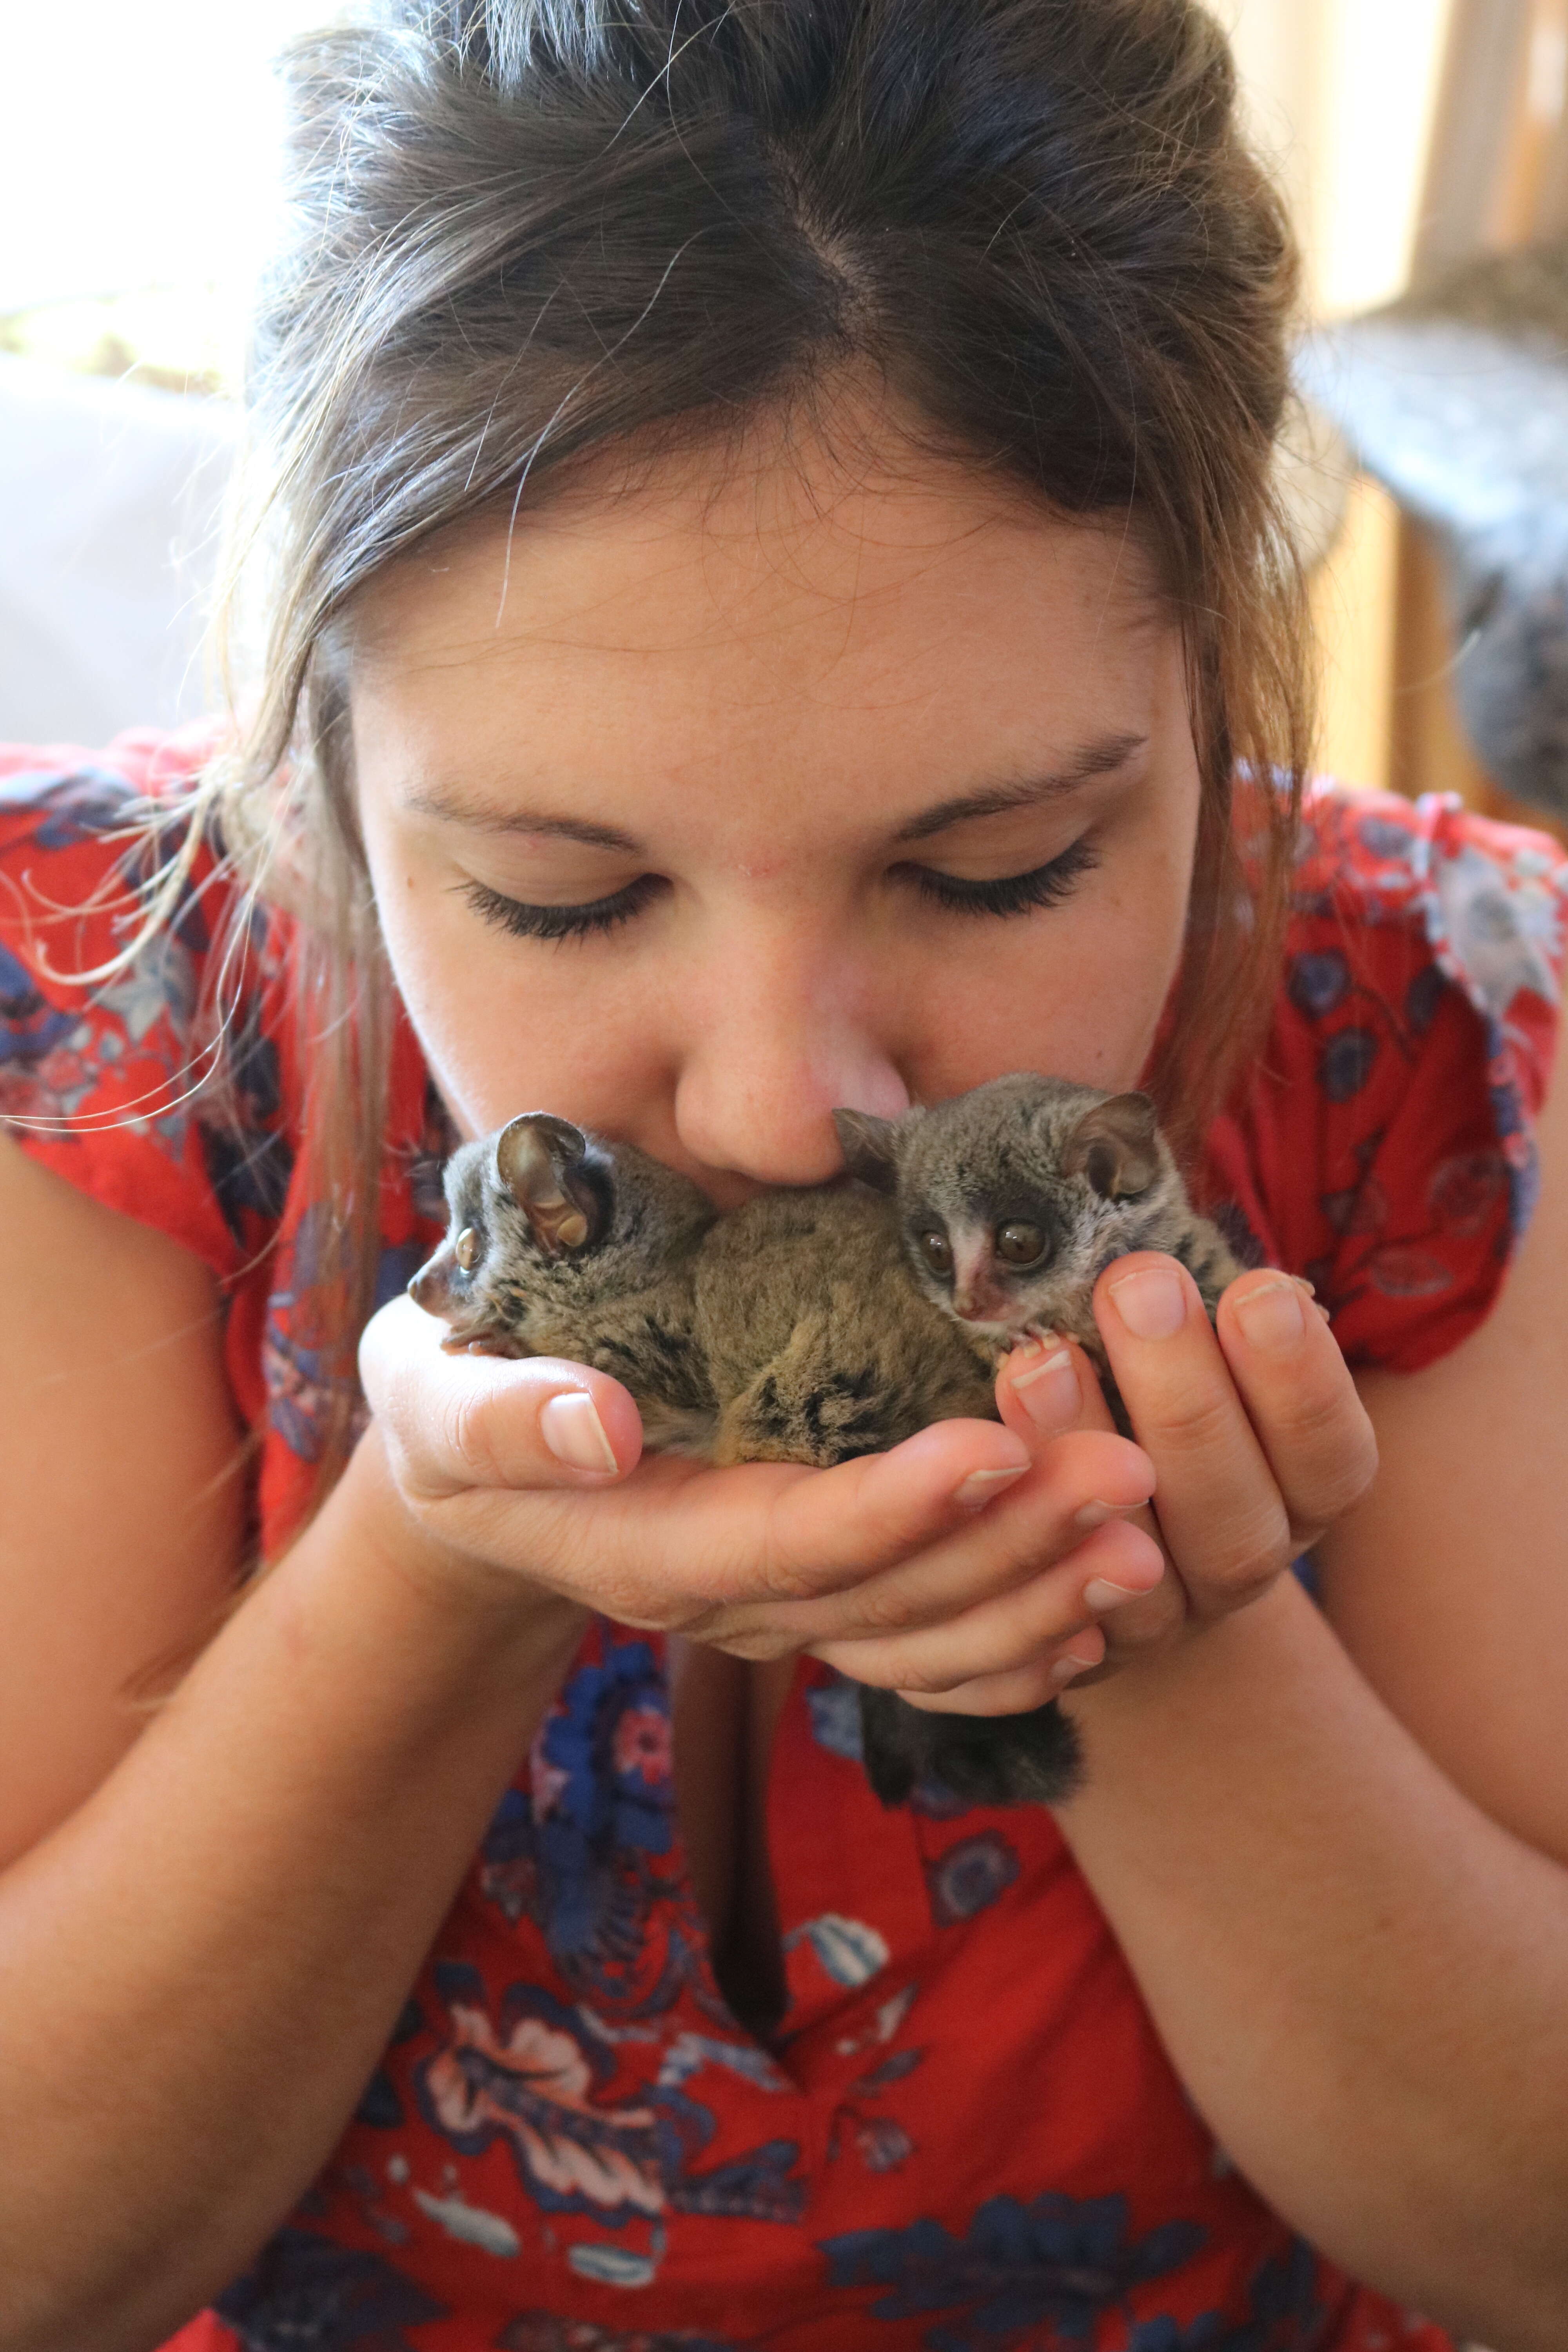 Woman kissing bushbabies in her hands